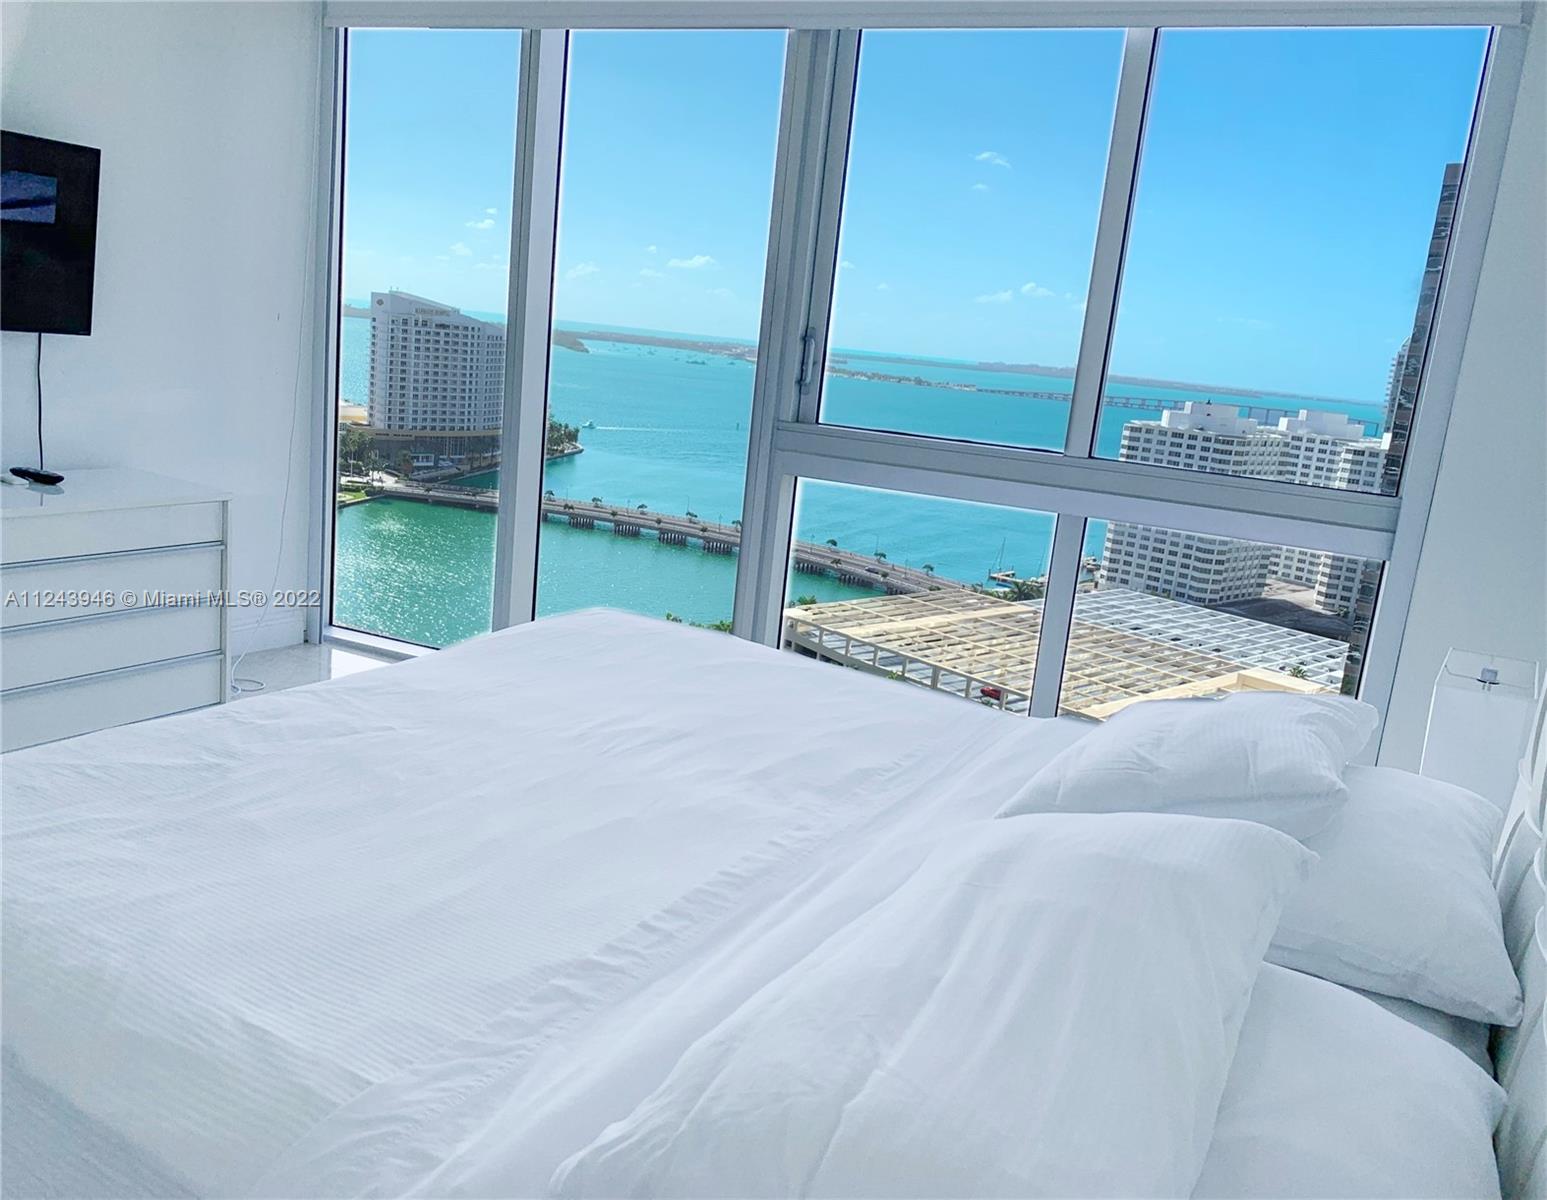 Amazing luxurious 2/2 unit in the heart of Brickell.
Stainless steel appliances, granite counter tops.
Spectacular bay and oceans views.
5 star amenities including pool, fitness center, business center, SPA, 24HRS Concierge &Valet Parking